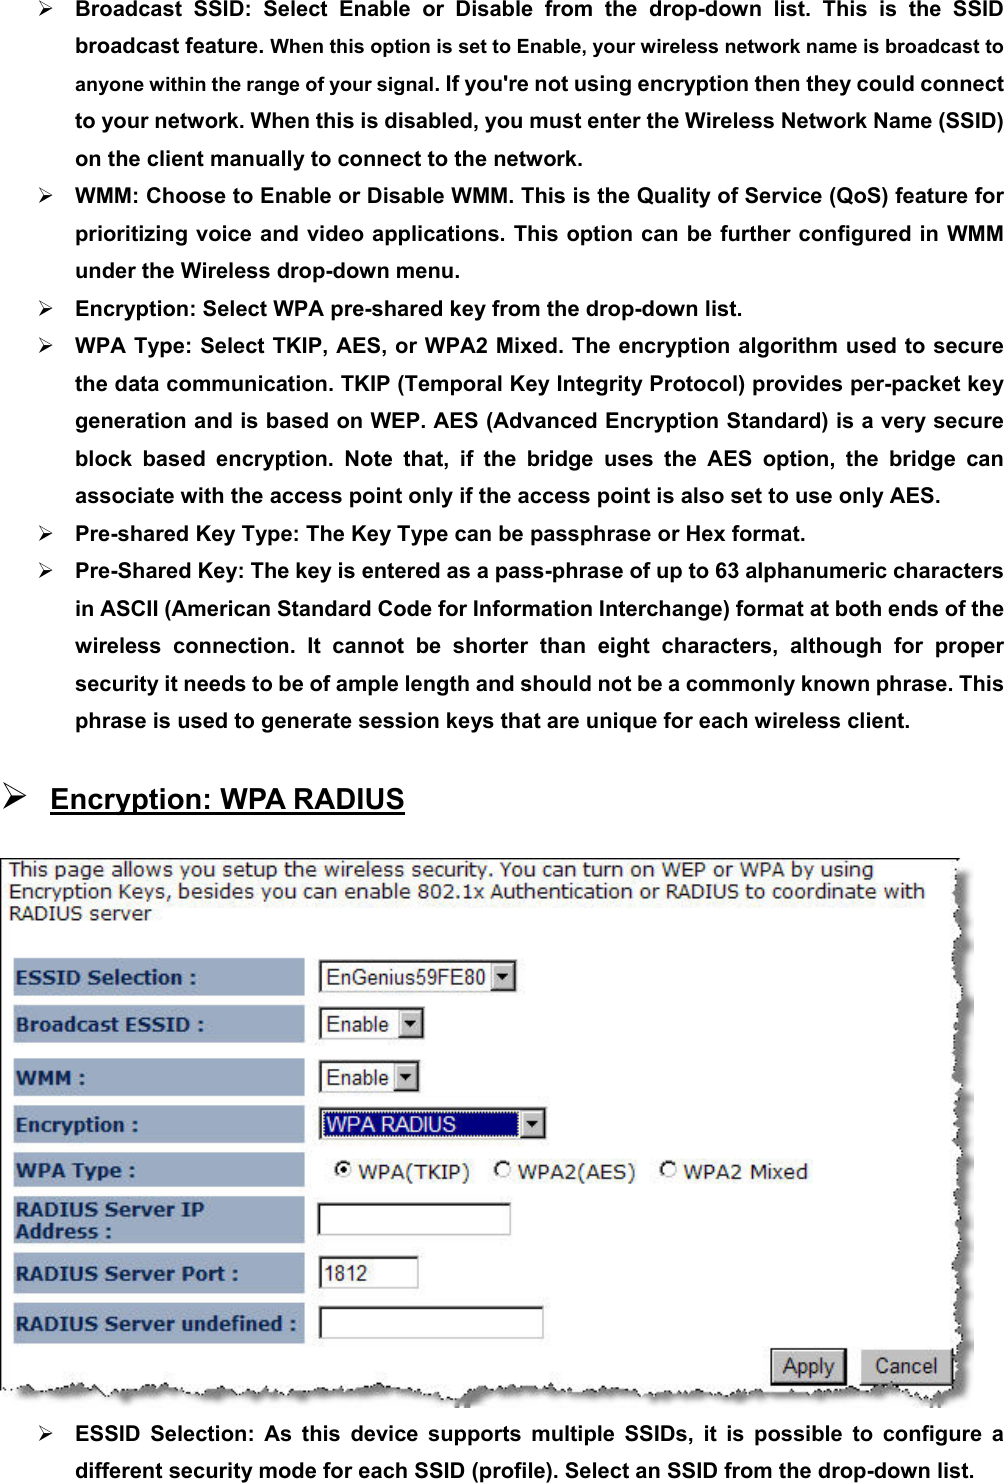 ¾ Broadcast SSID: Select Enable or Disable from the drop-down list. This is the SSID broadcast feature. When this option is set to Enable, your wireless network name is broadcast to anyone within the range of your signal. If you&apos;re not using encryption then they could connect to your network. When this is disabled, you must enter the Wireless Network Name (SSID) on the client manually to connect to the network. ¾ WMM: Choose to Enable or Disable WMM. This is the Quality of Service (QoS) feature for prioritizing voice and video applications. This option can be further configured in WMM under the Wireless drop-down menu.   ¾ Encryption: Select WPA pre-shared key from the drop-down list.   ¾ WPA Type: Select TKIP, AES, or WPA2 Mixed. The encryption algorithm used to secure the data communication. TKIP (Temporal Key Integrity Protocol) provides per-packet key generation and is based on WEP. AES (Advanced Encryption Standard) is a very secure block based encryption. Note that, if the bridge uses the AES option, the bridge can associate with the access point only if the access point is also set to use only AES.   ¾ Pre-shared Key Type: The Key Type can be passphrase or Hex format.     ¾ Pre-Shared Key: The key is entered as a pass-phrase of up to 63 alphanumeric characters in ASCII (American Standard Code for Information Interchange) format at both ends of the wireless connection. It cannot be shorter than eight characters, although for proper security it needs to be of ample length and should not be a commonly known phrase. This phrase is used to generate session keys that are unique for each wireless client.   ¾ Encryption: WPA RADIUS  ¾ ESSID Selection: As this device supports multiple SSIDs, it is possible to configure a different security mode for each SSID (profile). Select an SSID from the drop-down list.   